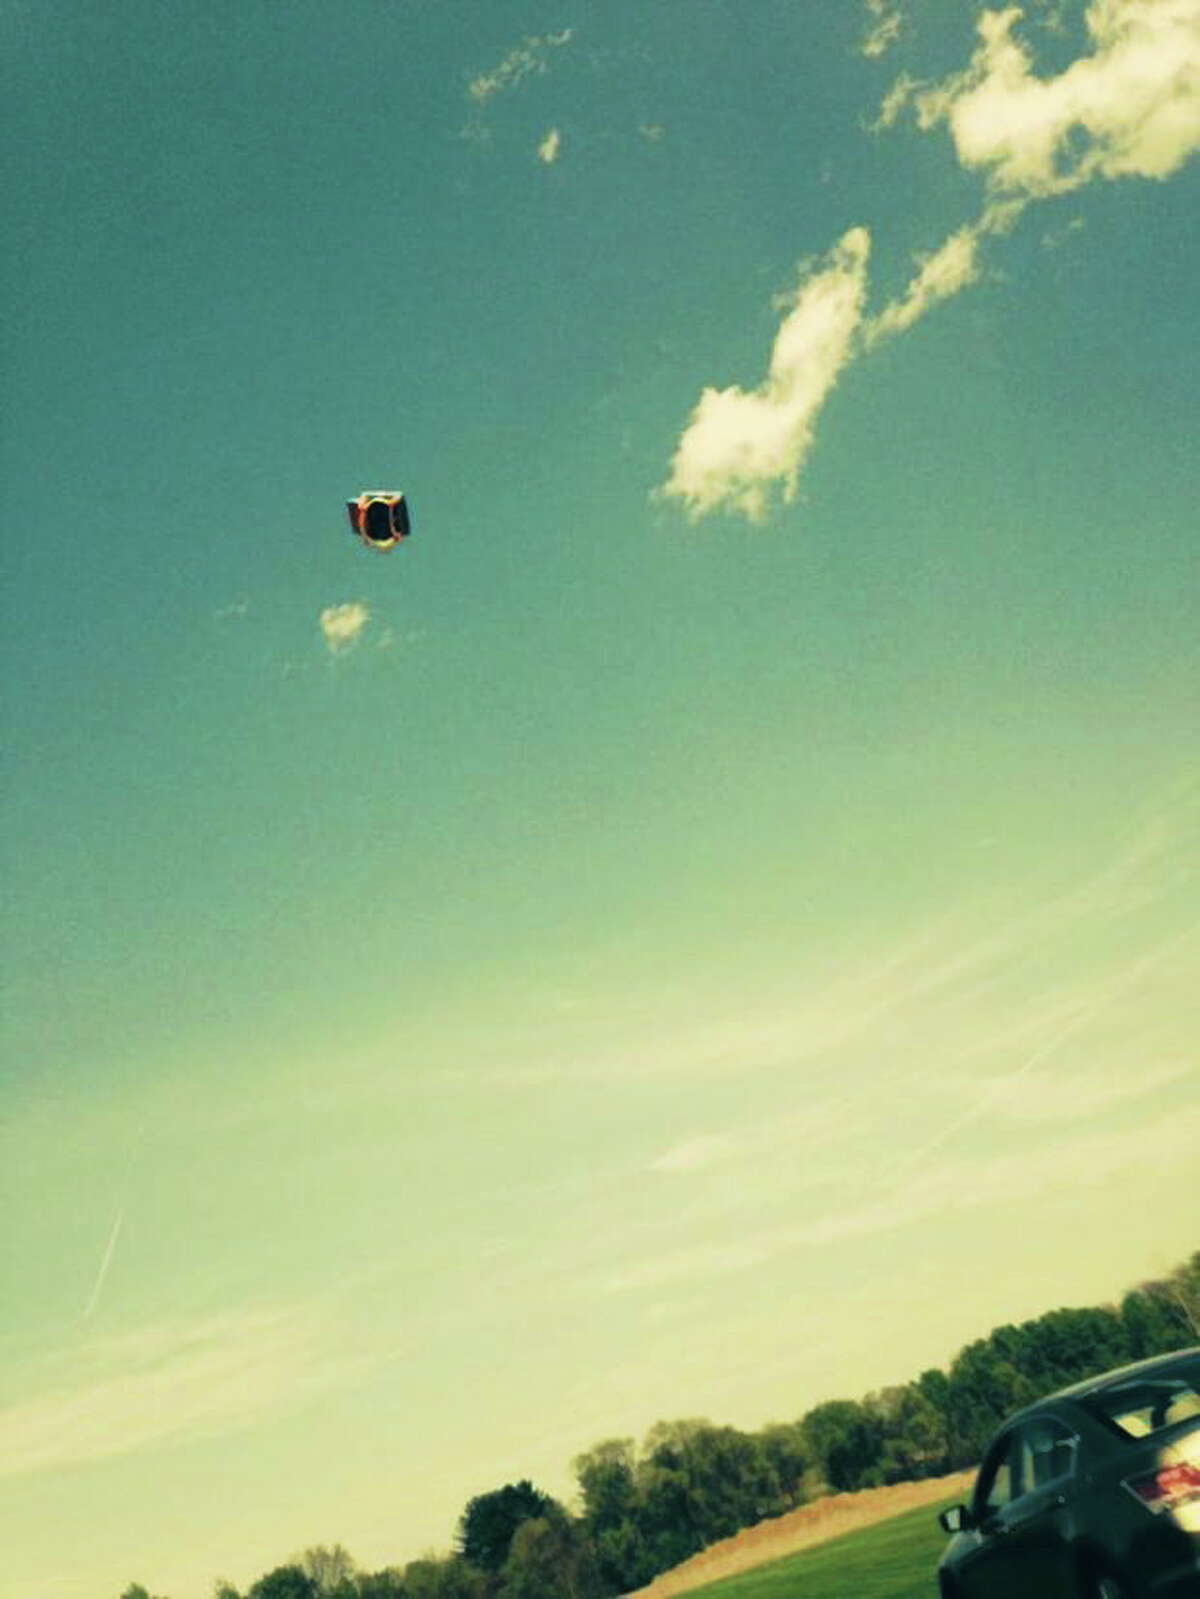 This Instagram photo, captured by a witness, shows the bounce house sent flying by a gust of wind, seriously injuring three children.